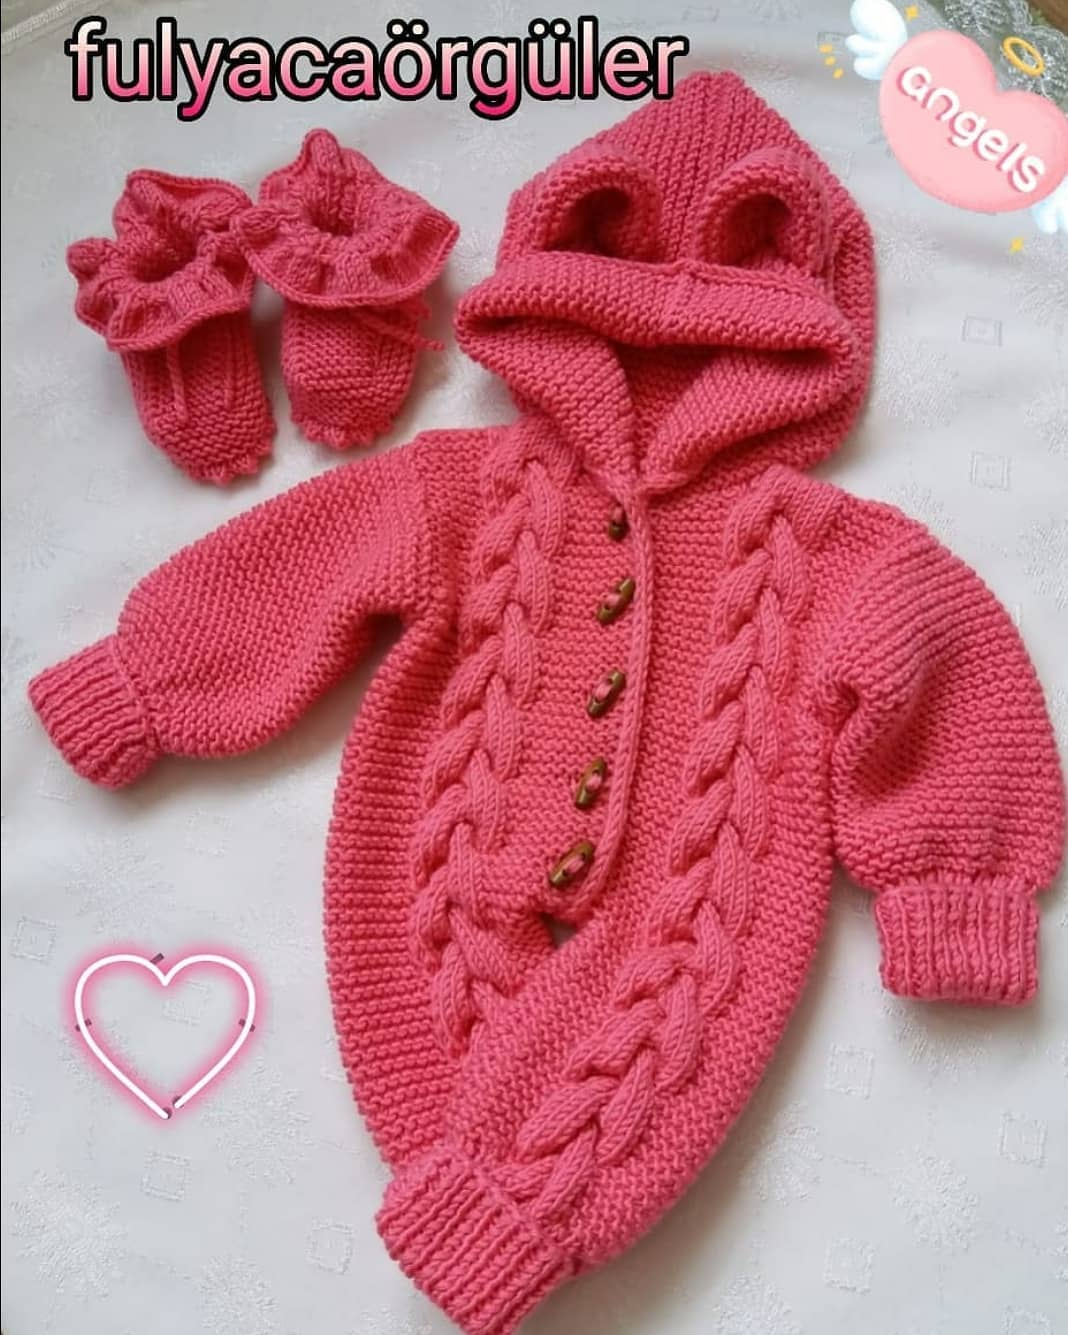 Free Crochet Baby Patterns Overalls Free Crochet Pattern For Ba New Pattern Images For 2019